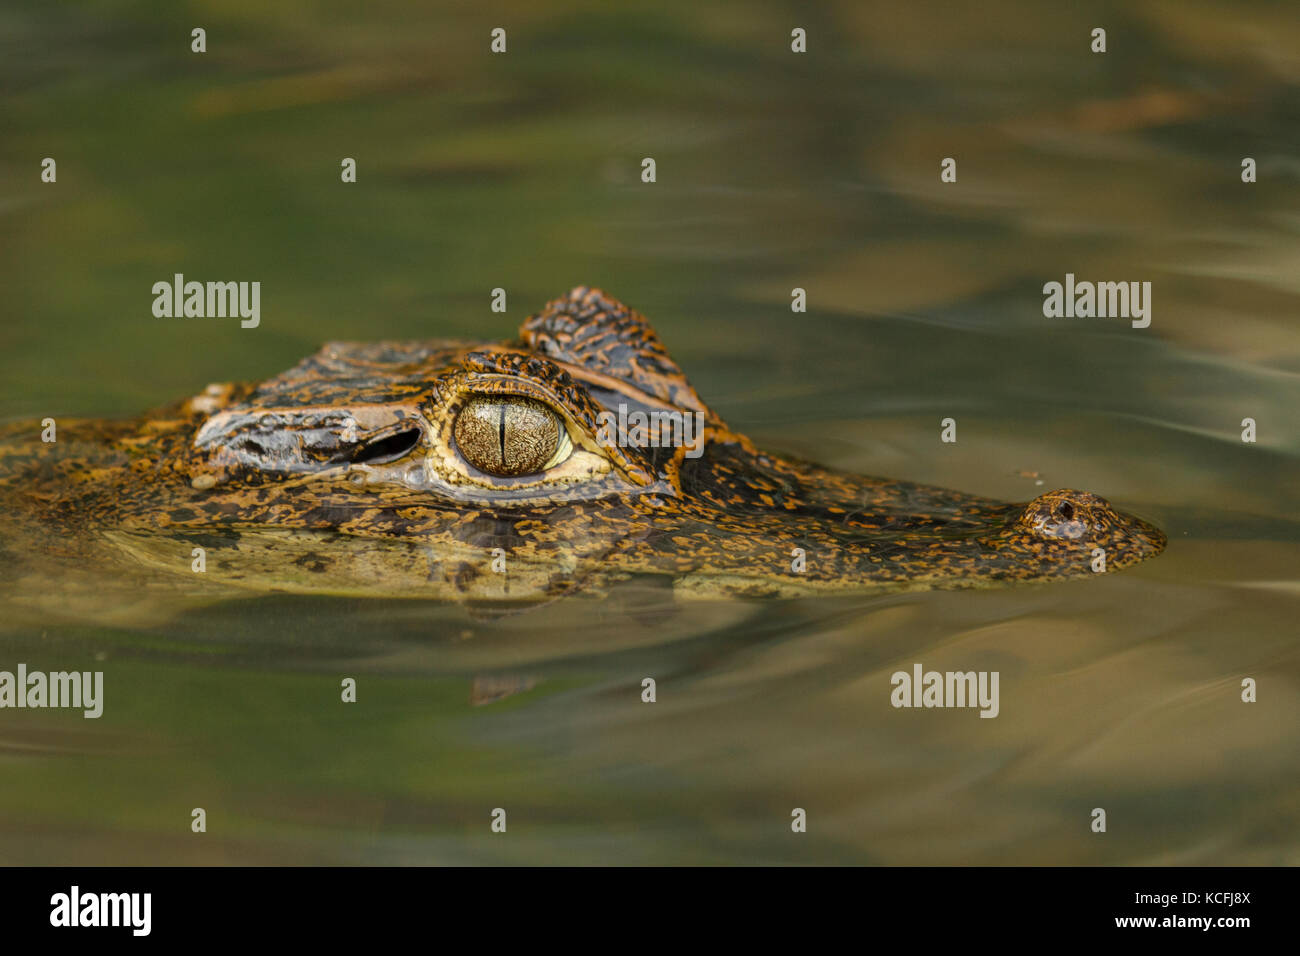 Spectacled Caiman, Caiman crocodilus, Central America, Costa Rica, reptiles Stock Photo